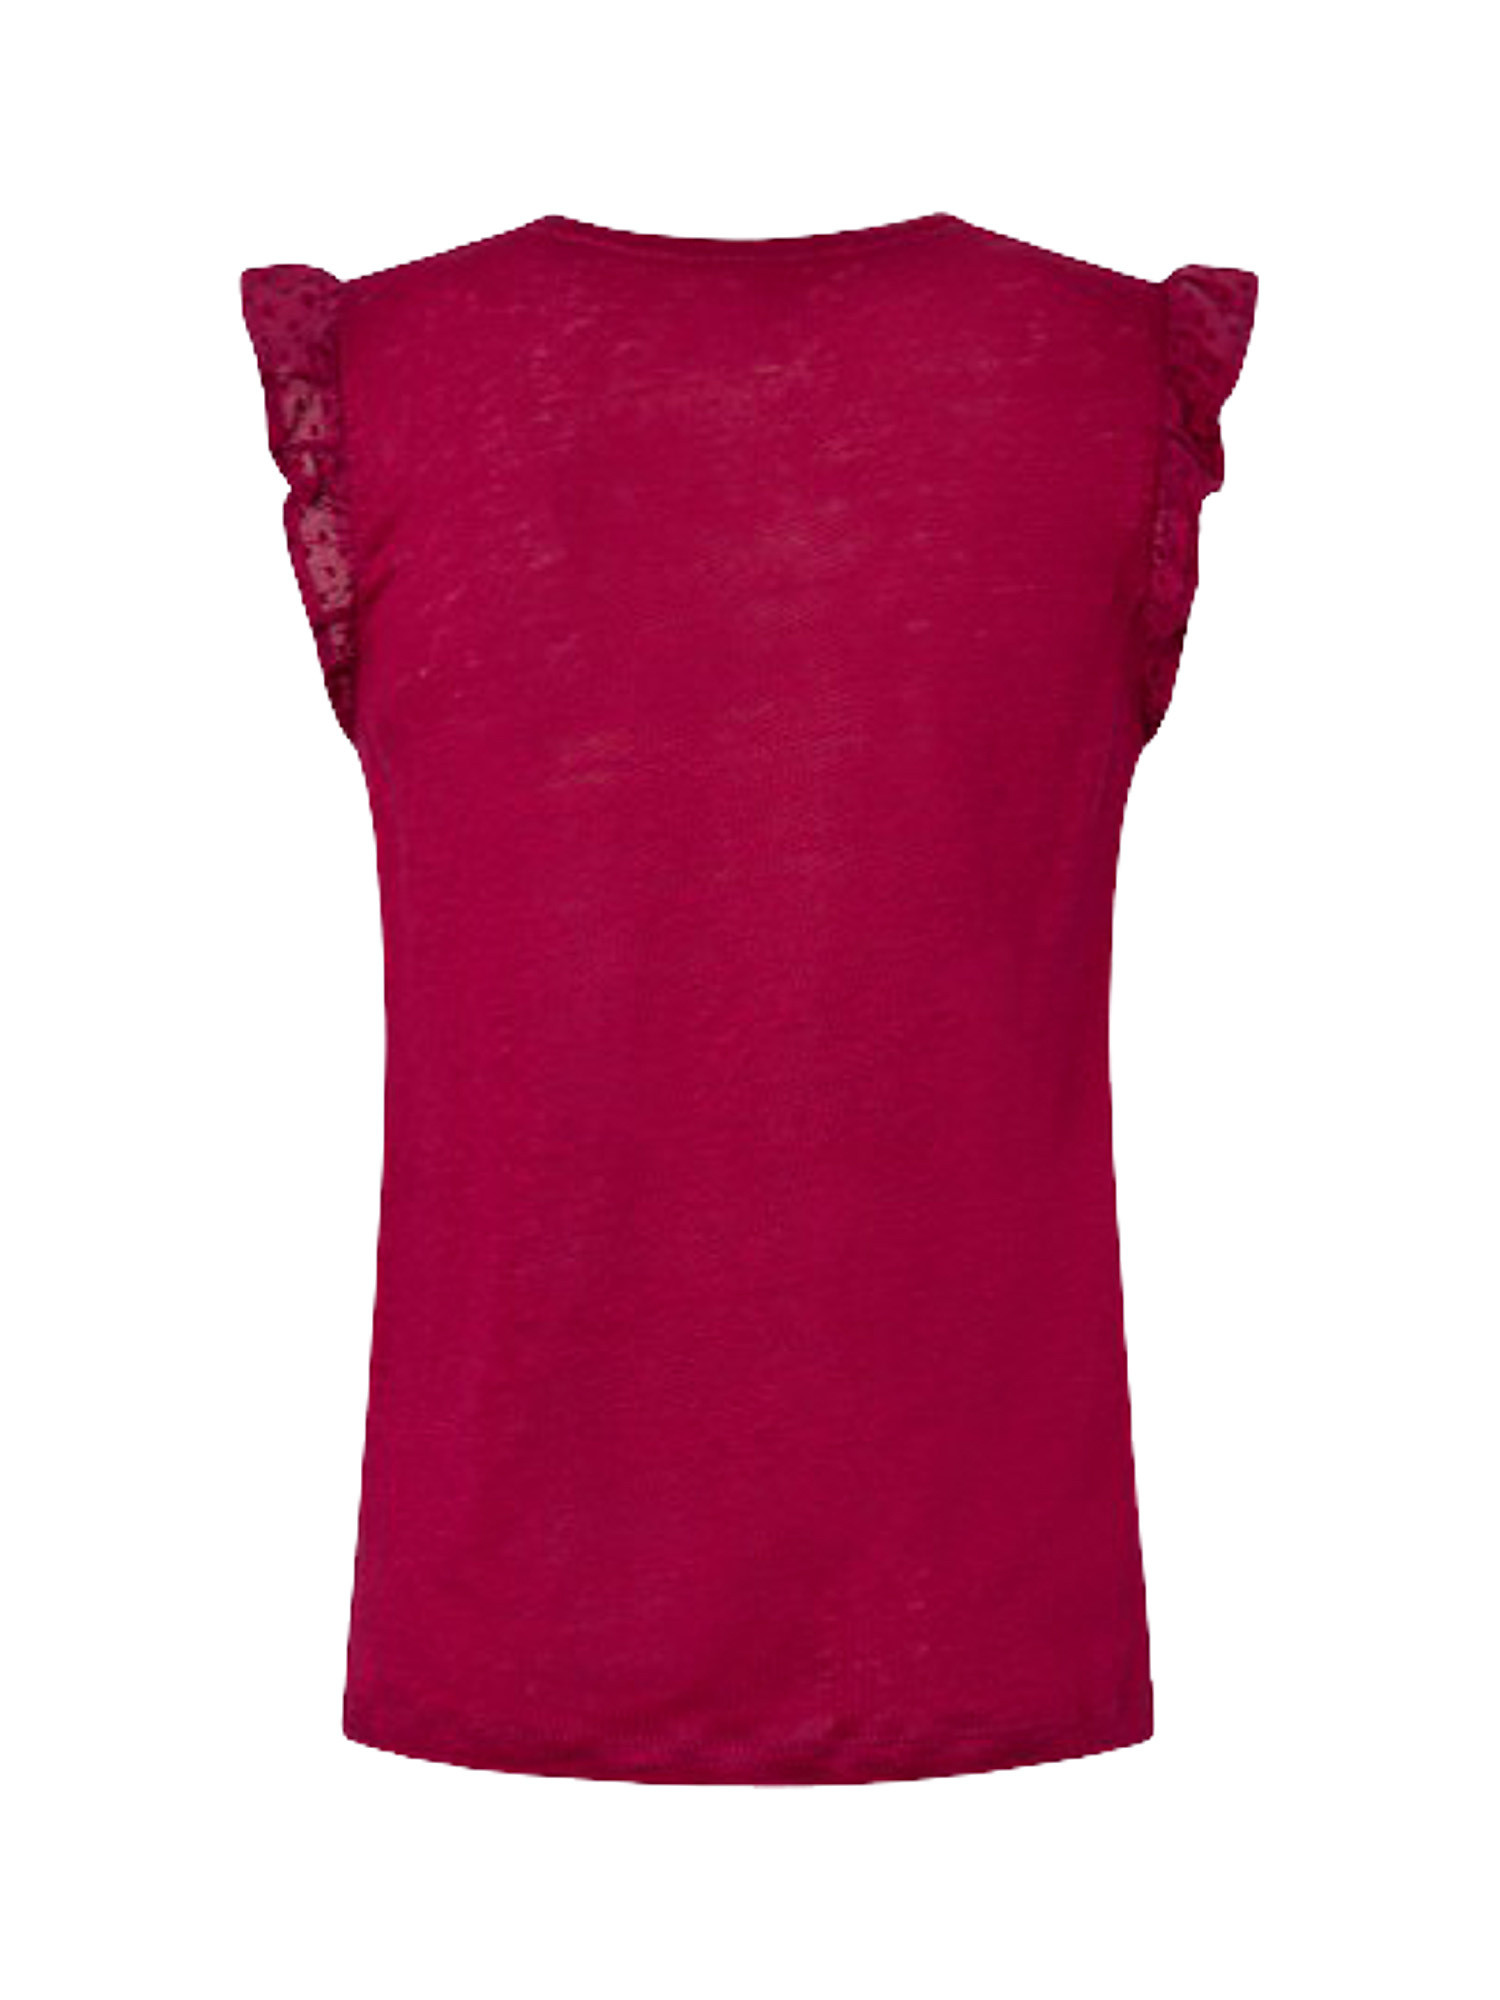 T-shirt con volant daysies, Rosa fuxia, large